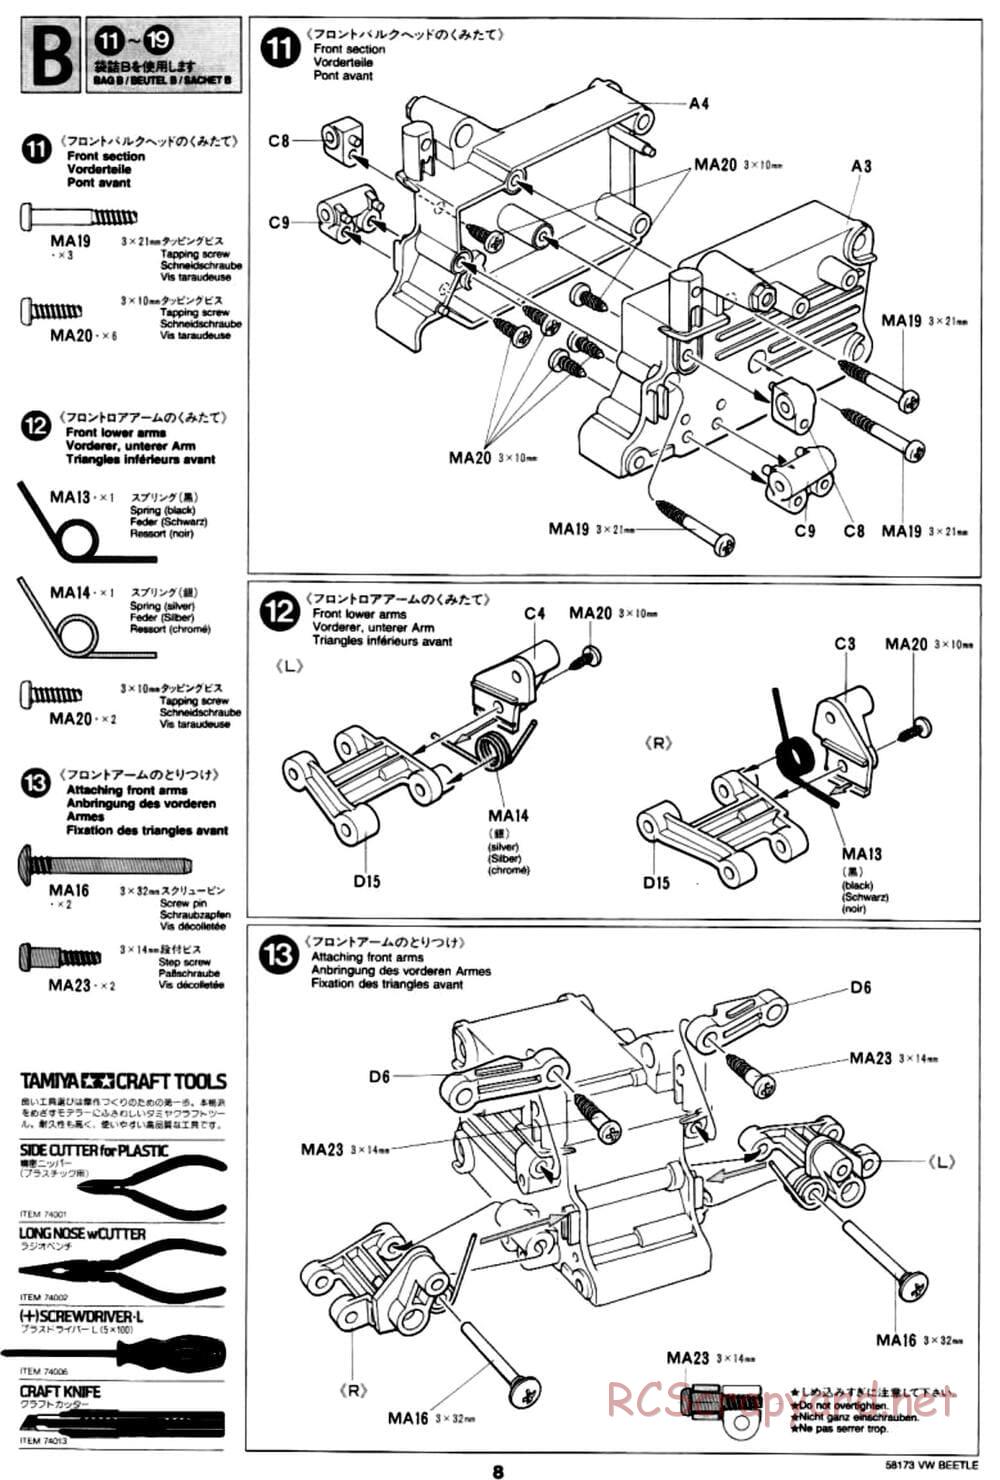 Tamiya - Volkswagen Beetle - M02L Chassis - Manual - Page 8